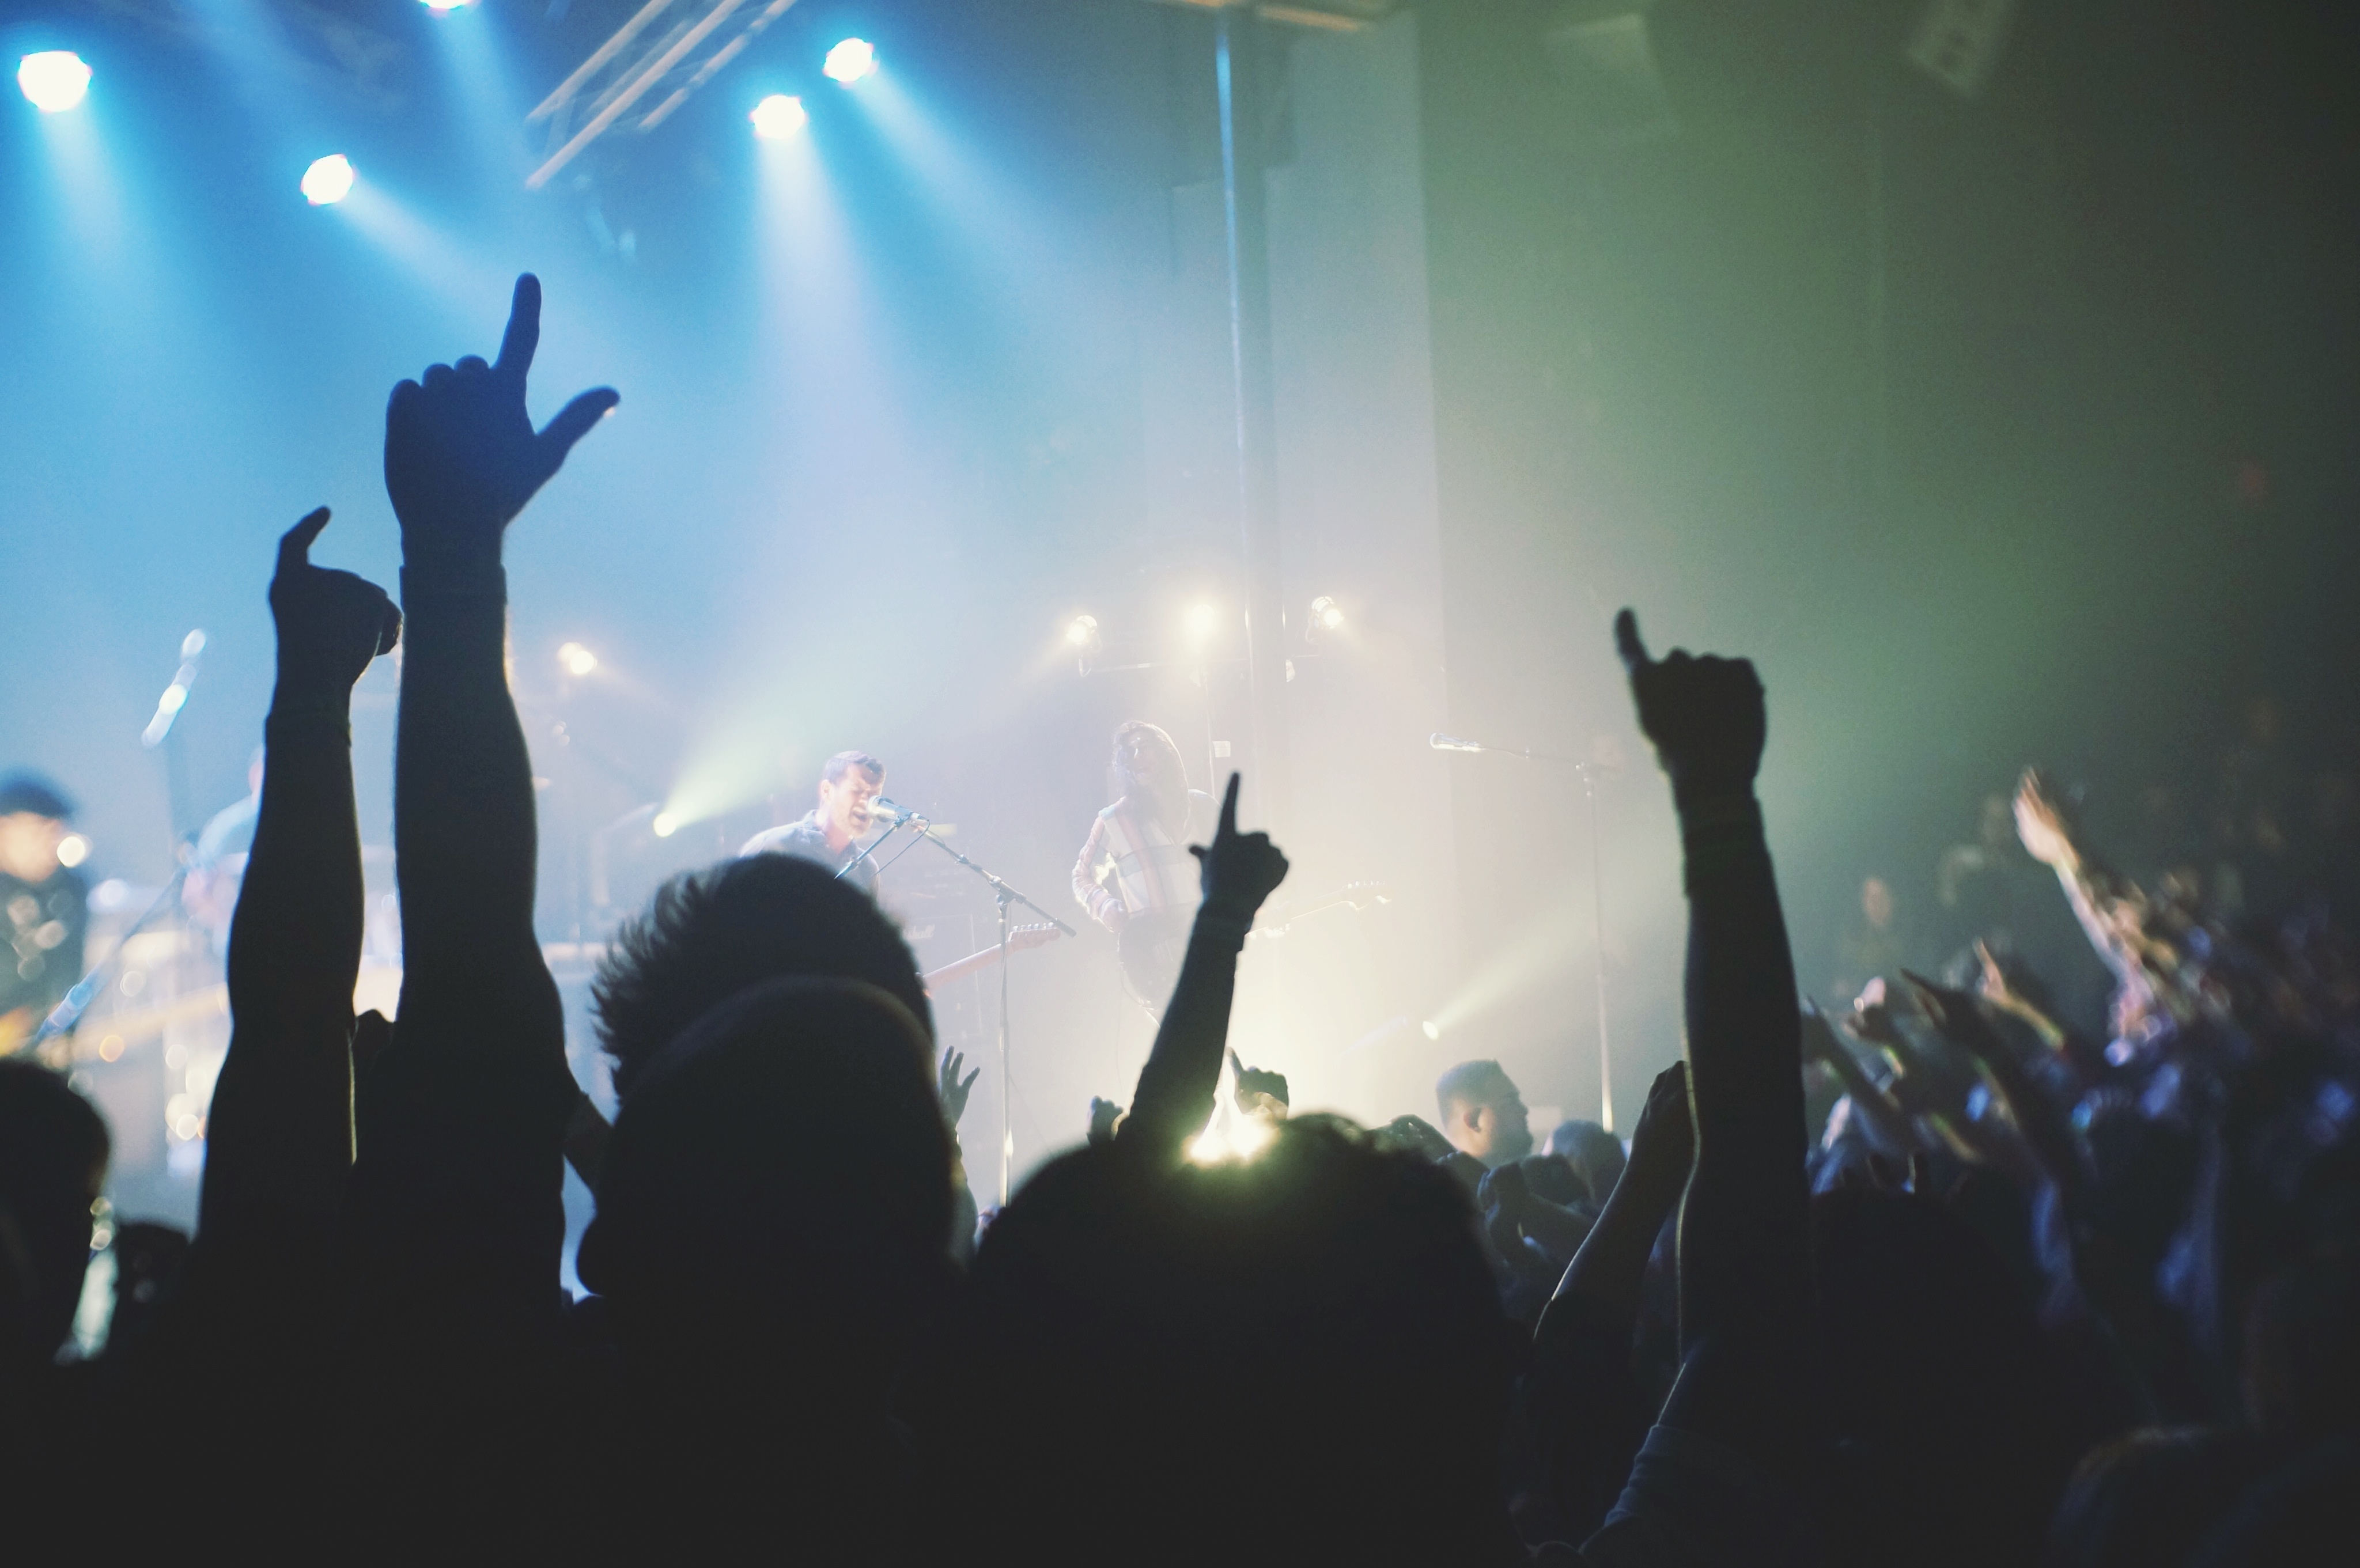 rock-silhouette-music-light-group-people-night-smoke-crowd-celebration-concert-singer-band-audience-live-dance-show-nightlife-club-musician-cheer-light-show-jam-perform-performance-art-festival-lights-stage-pop-fun-hands.jpg (1.39 MB)